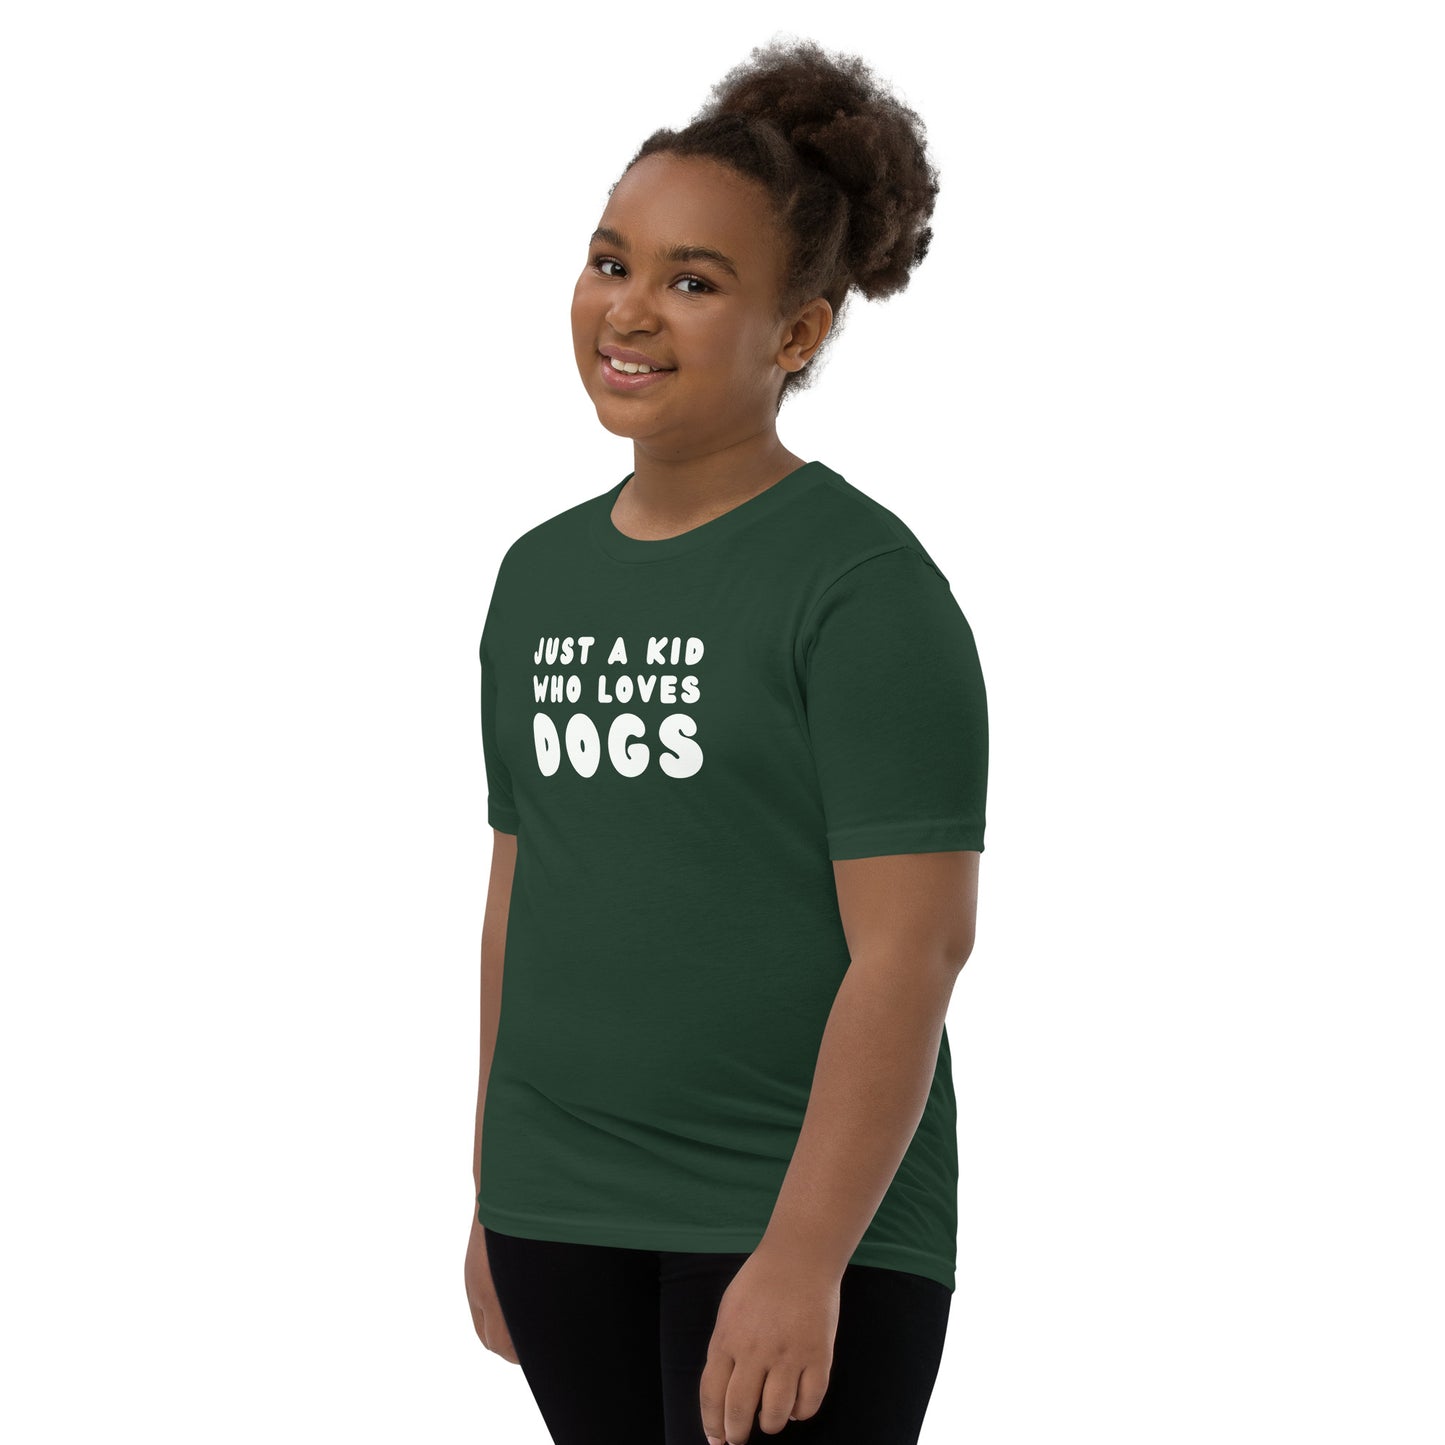 Model in Just a kid who loves dogs kid tshirt for German Shepherd lovers, green color - GSD Colony